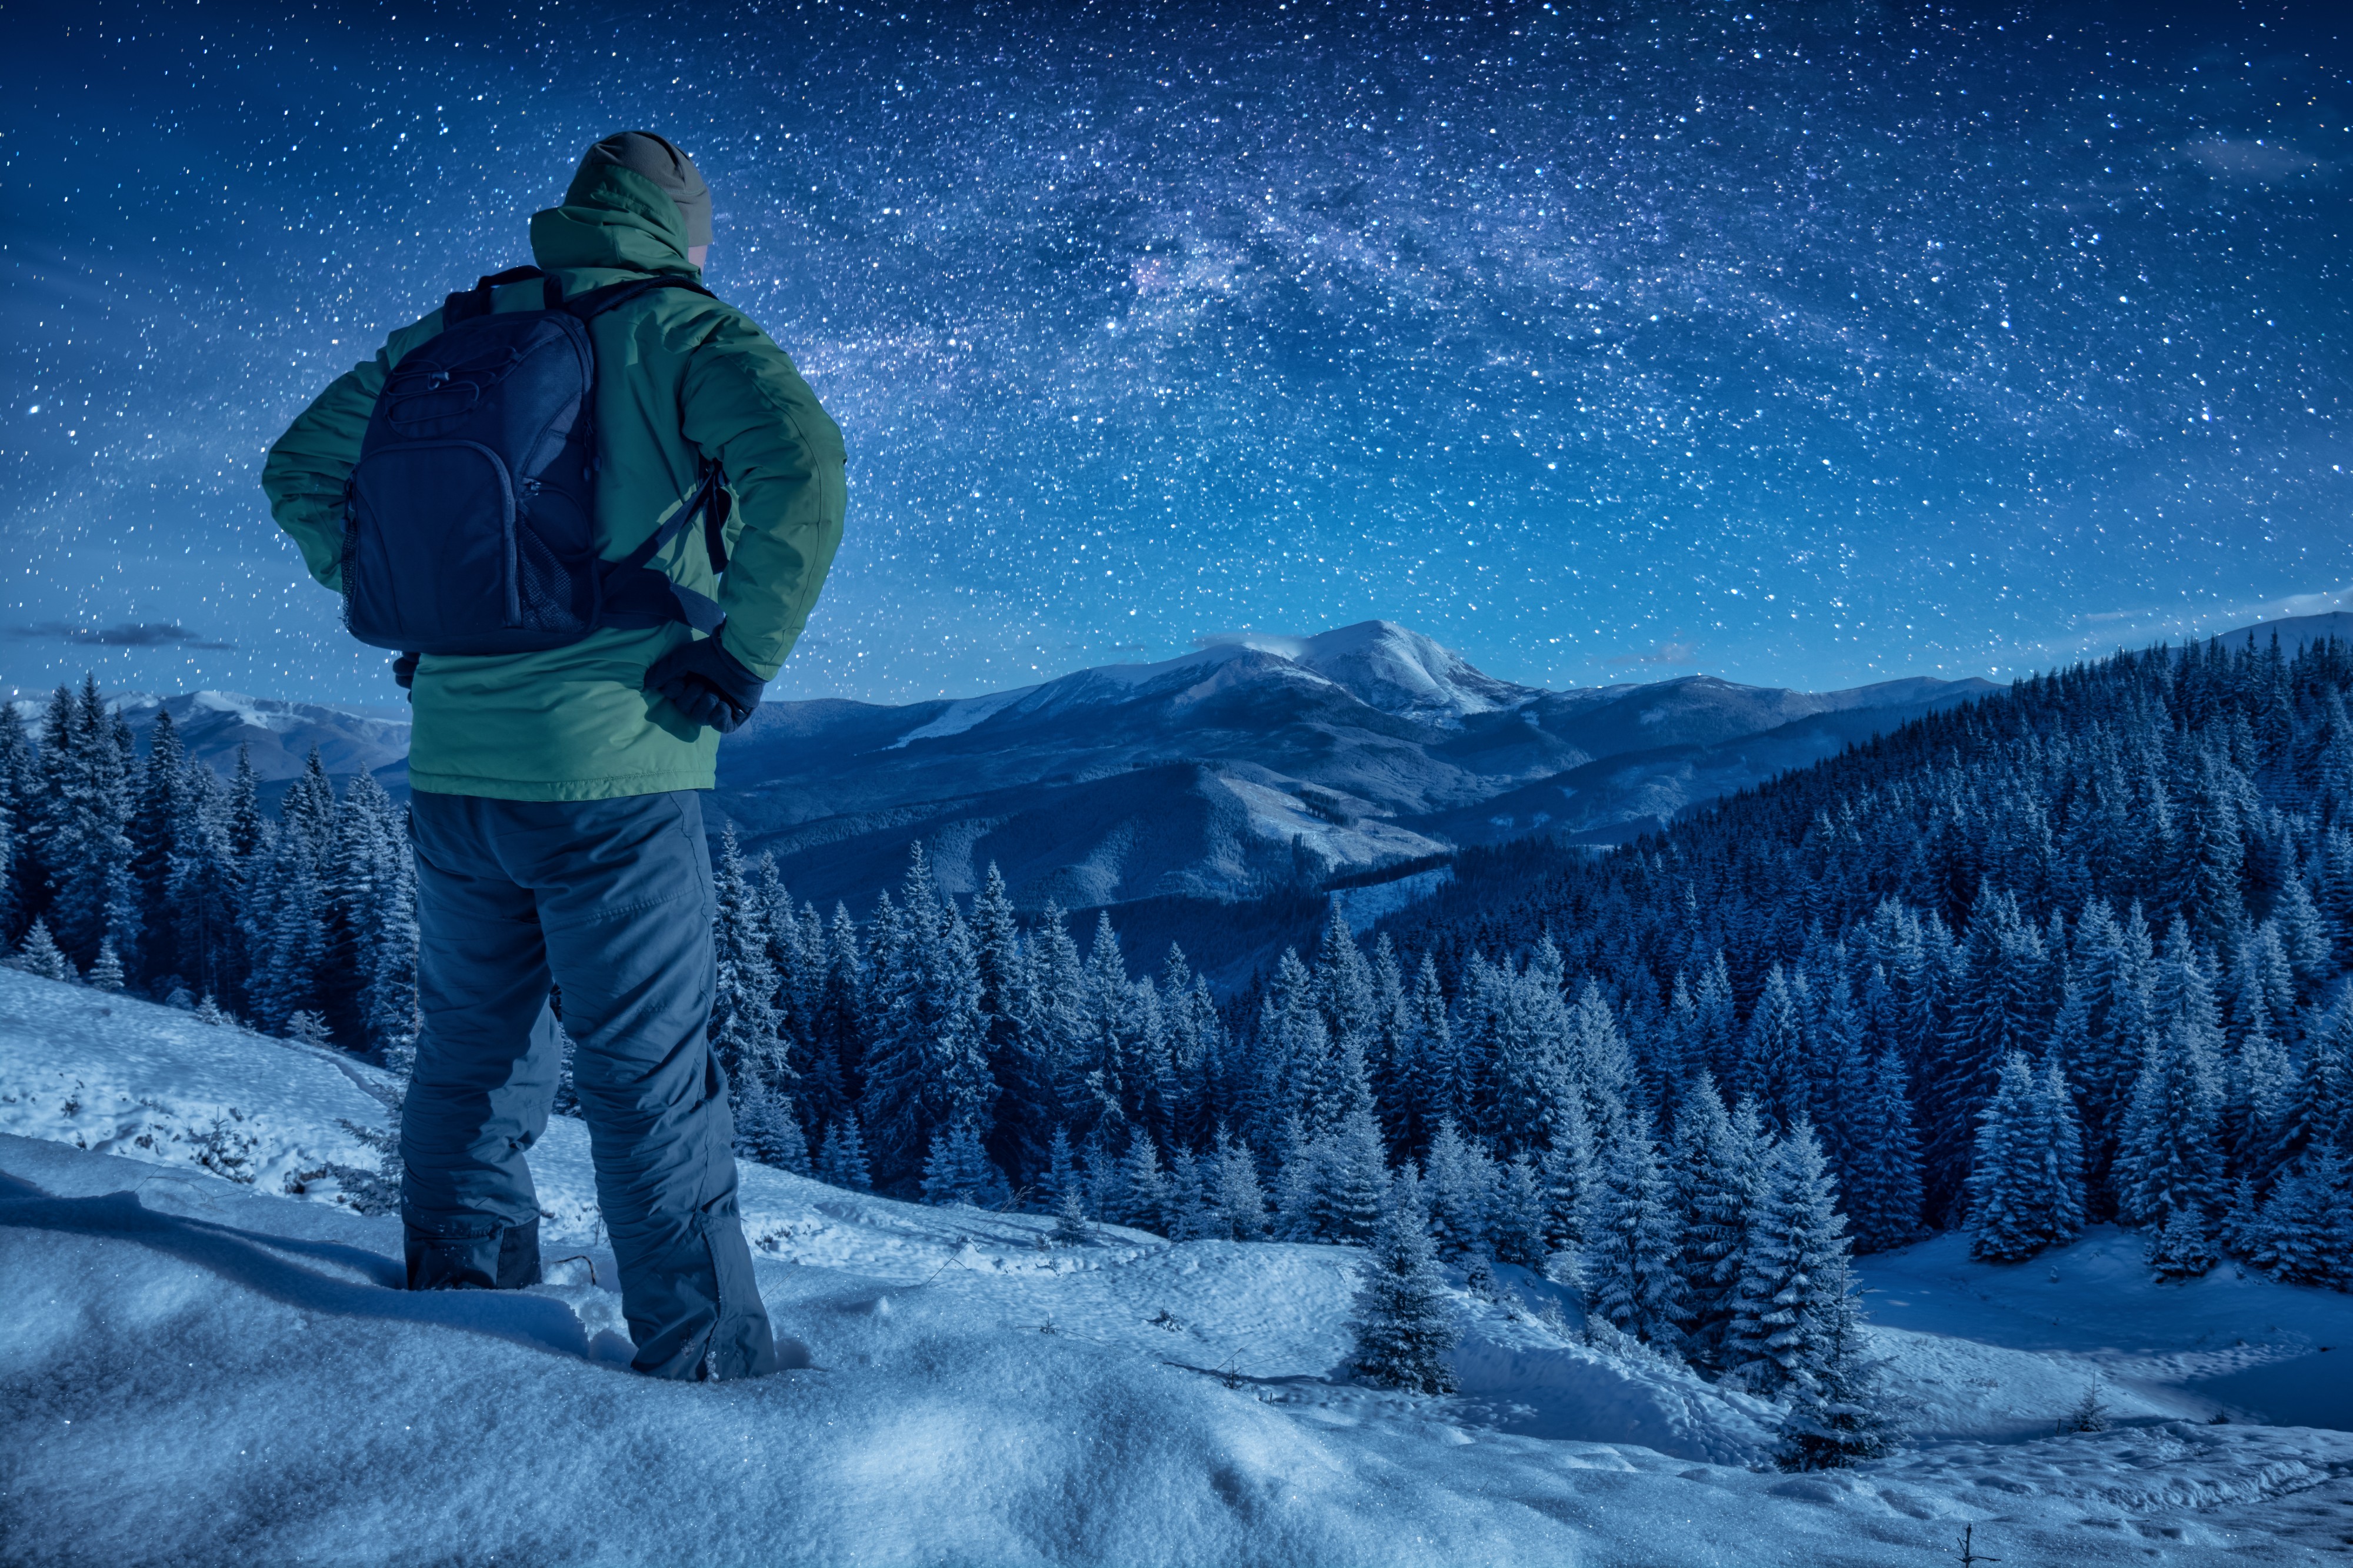 A climber standing on a snowy slope at night